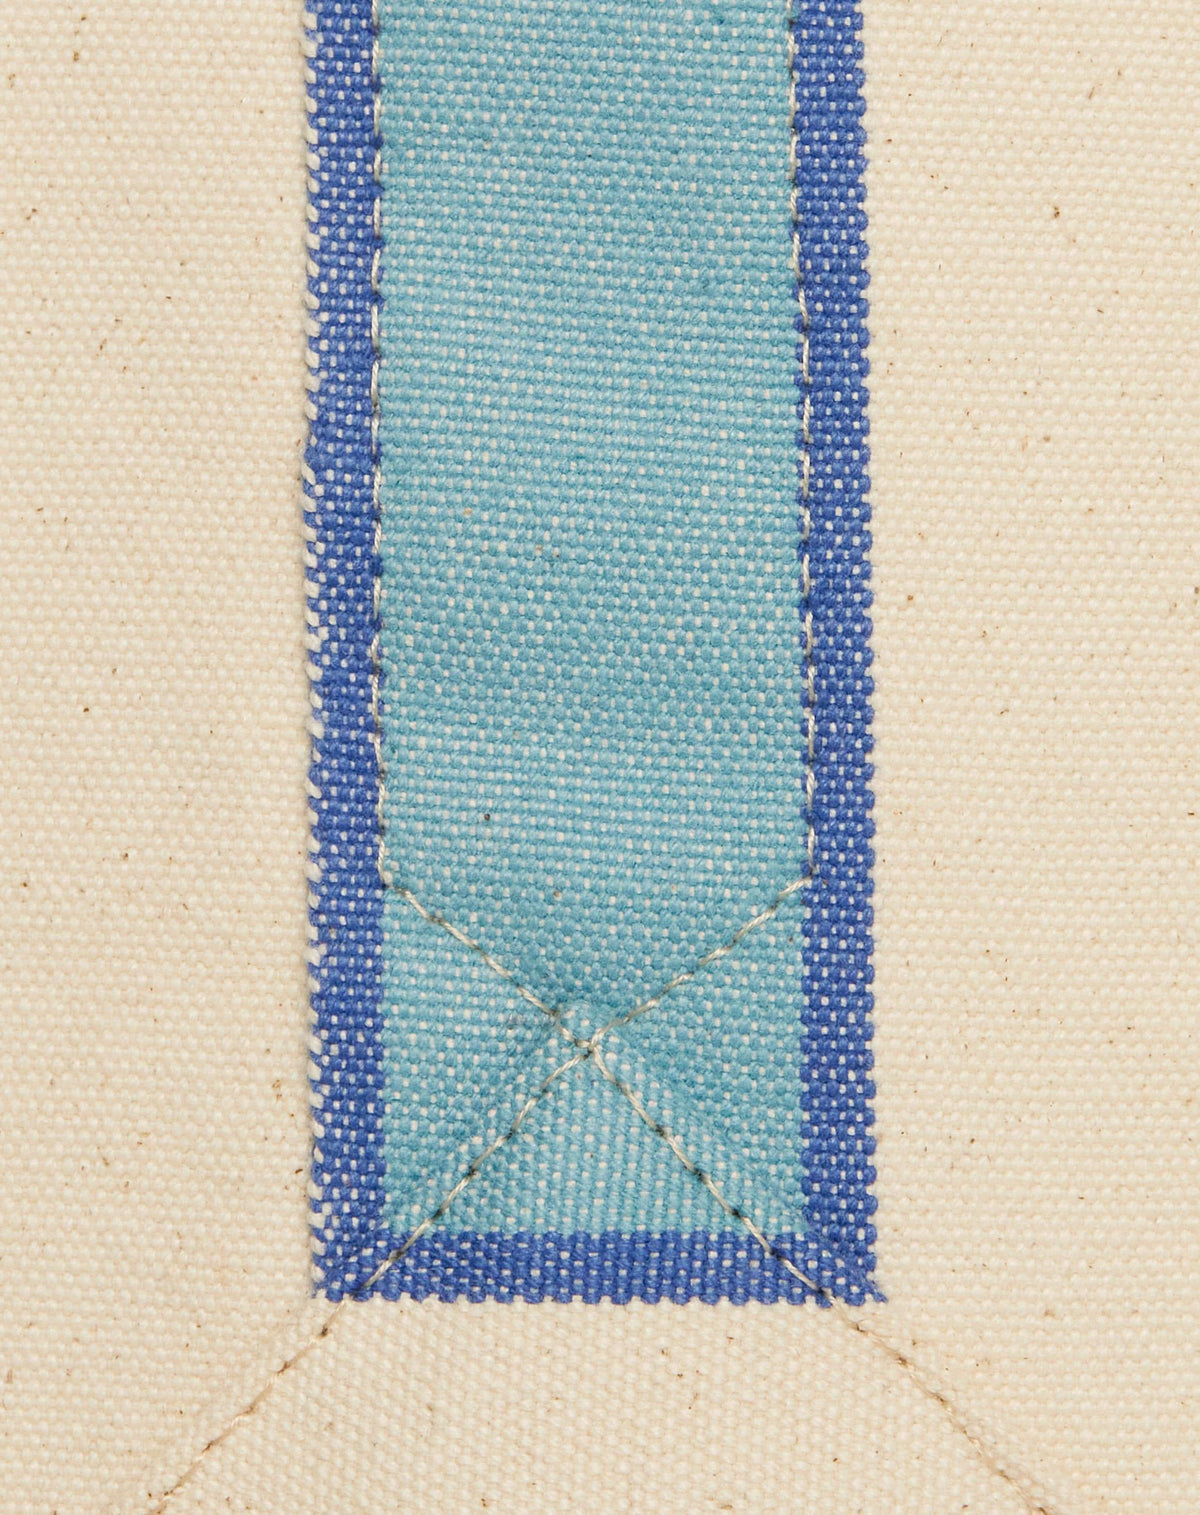 Close-up image of natural ecru canvas and contrasting blue stripe and stitching detail.